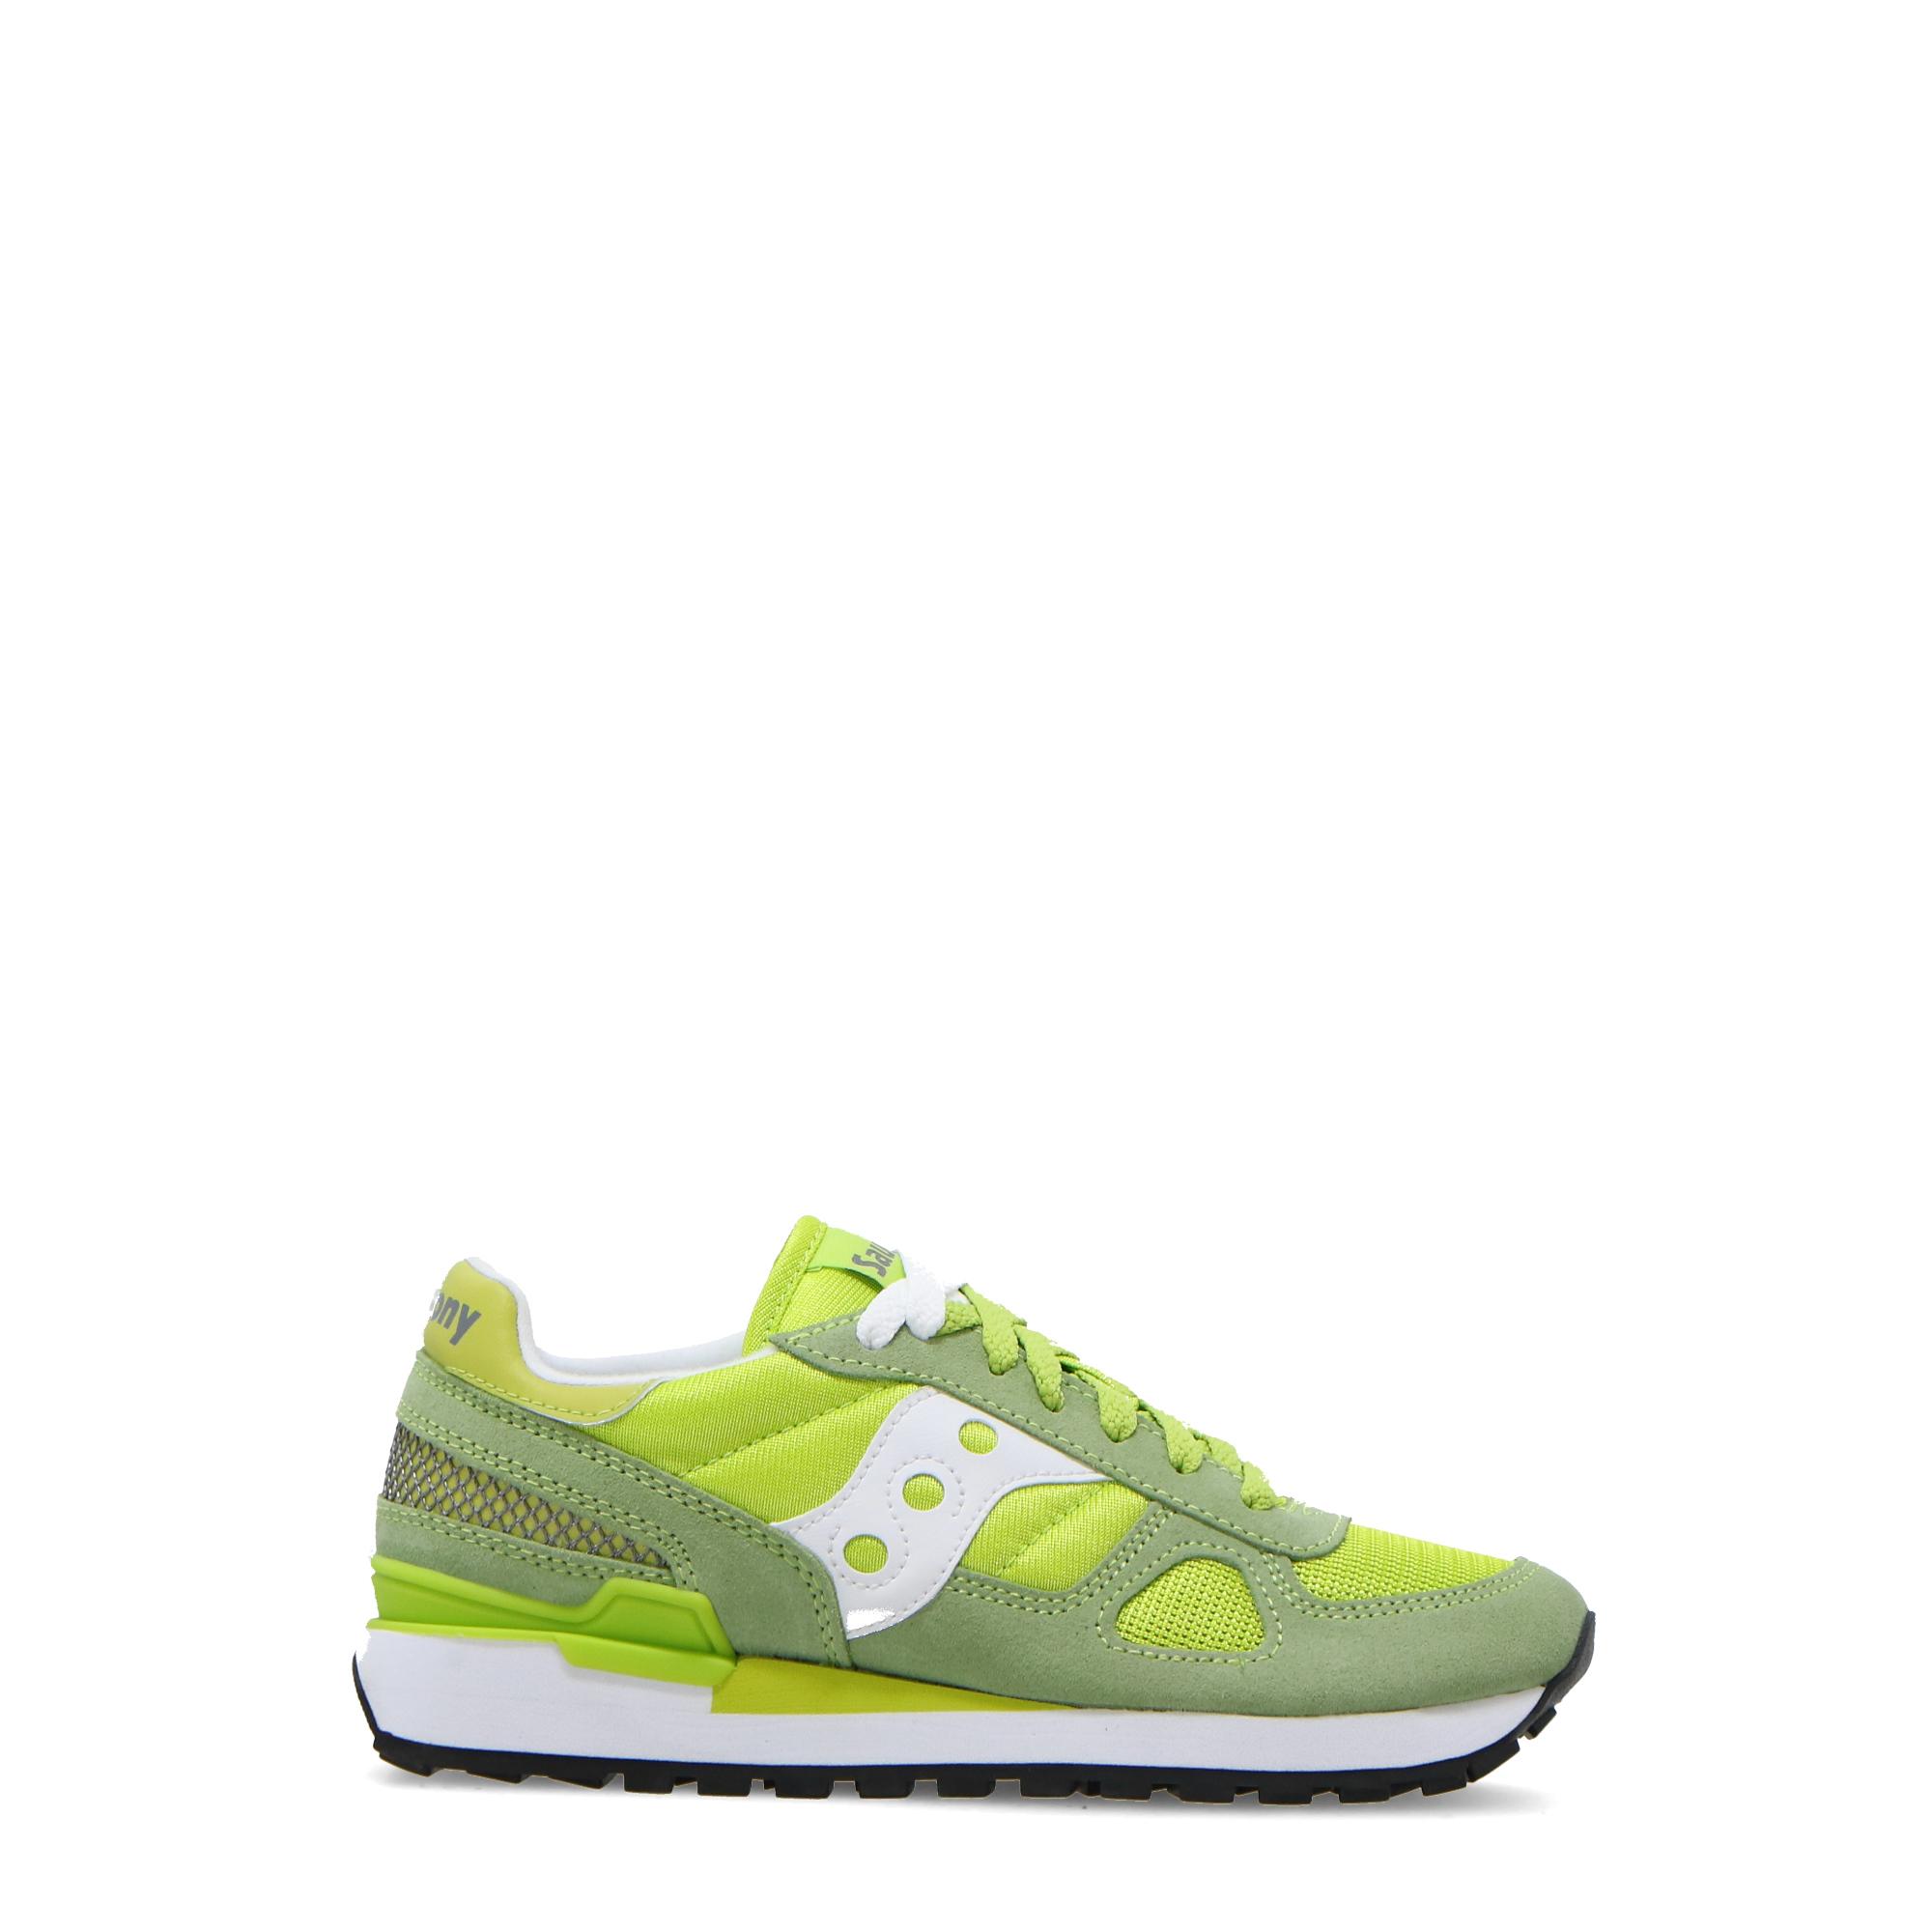 lime green saucony